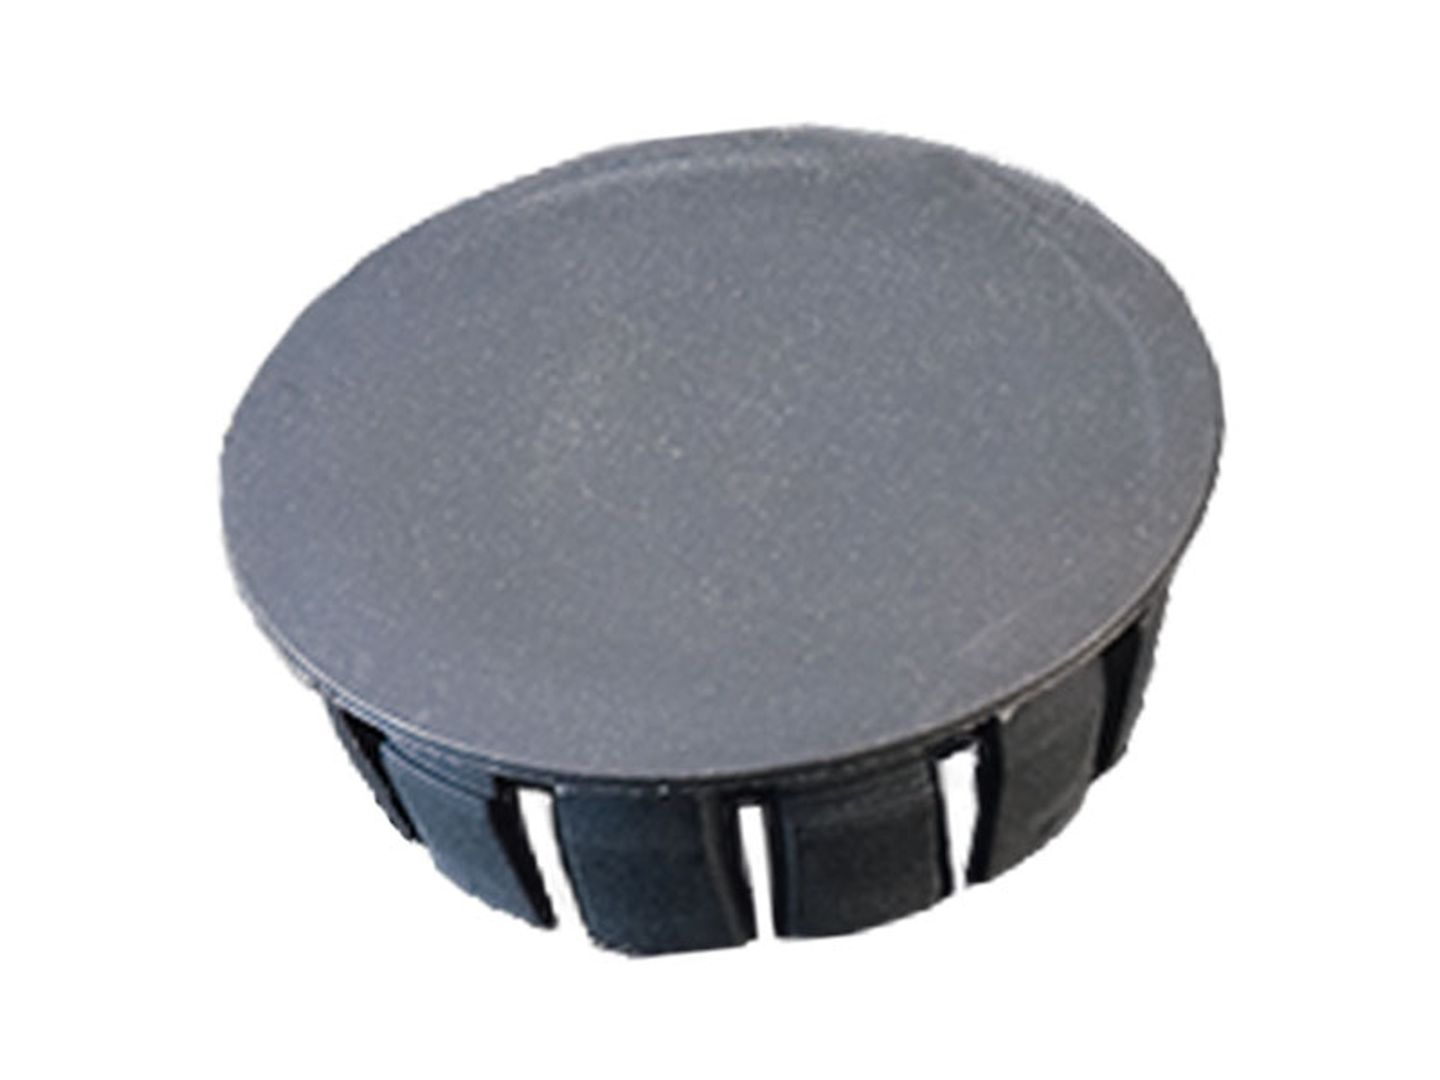 Rigid PE 20 per Package Details about   7/16” Hole Plugs Snap-In Round Deep  W Flexible Ridges 